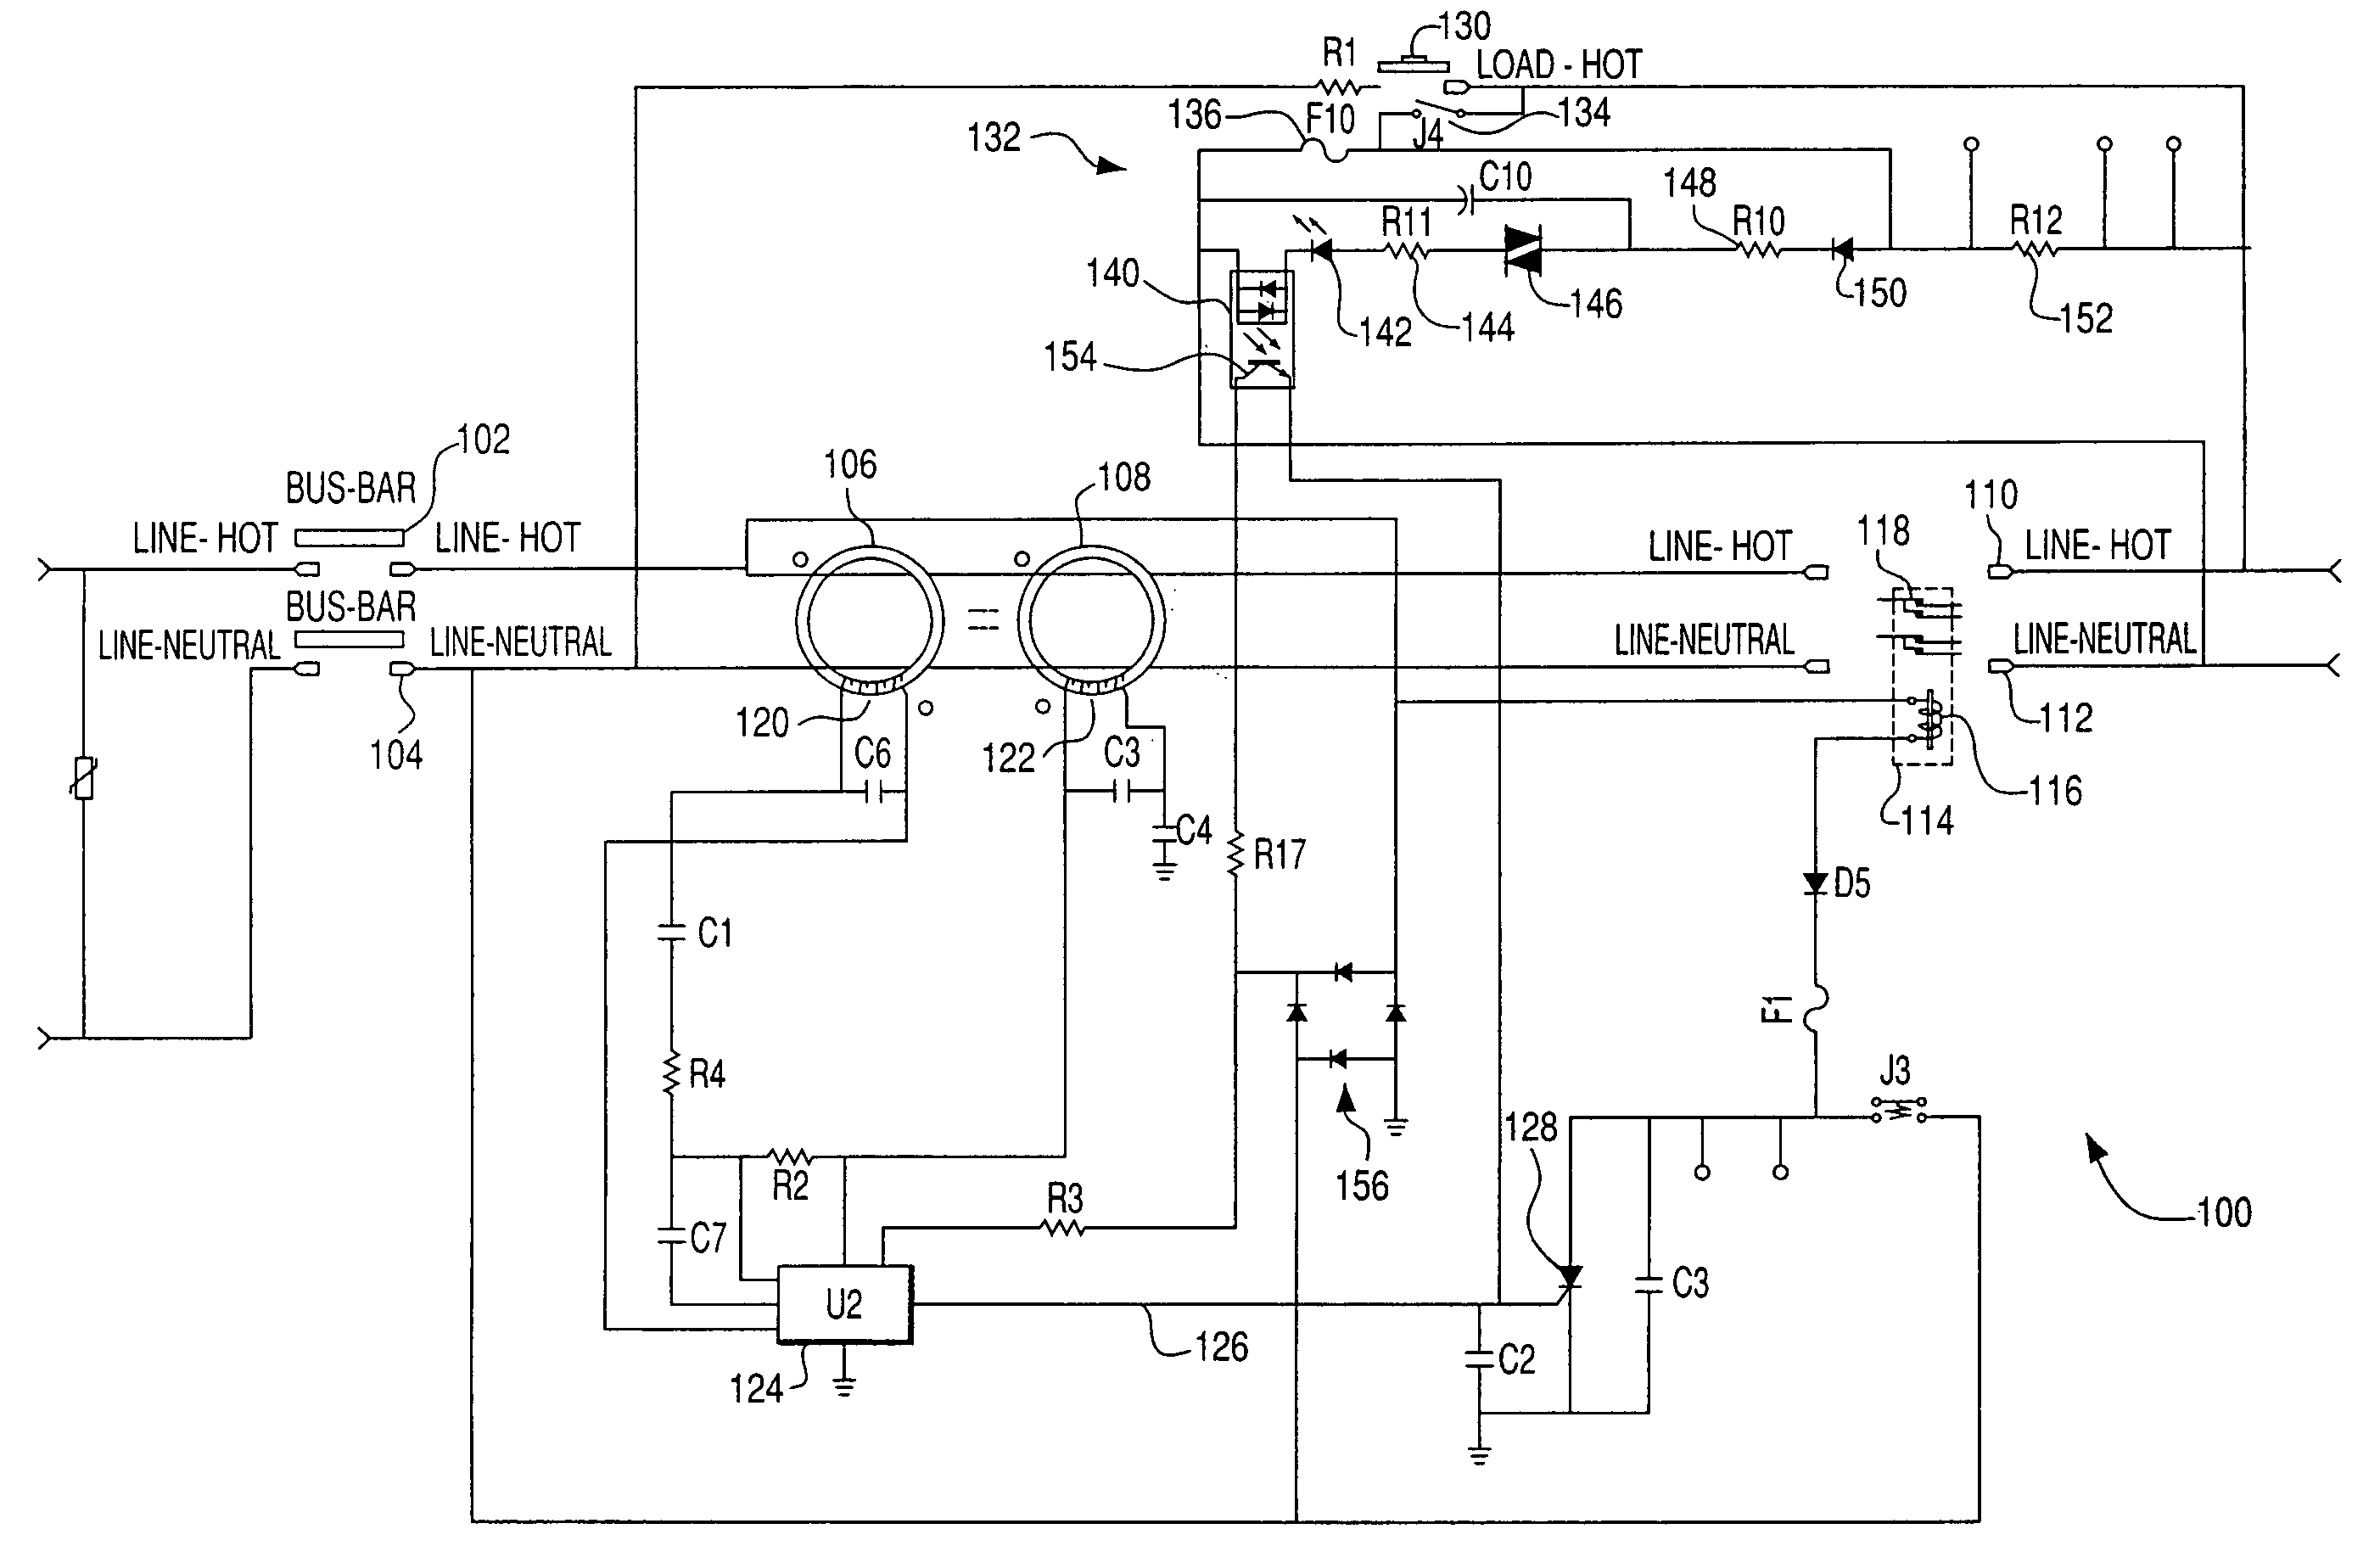 Ground fault circuit interruptor (GFCI) device having safe contact end-of-life condition and method of detecting same in a GFCI device